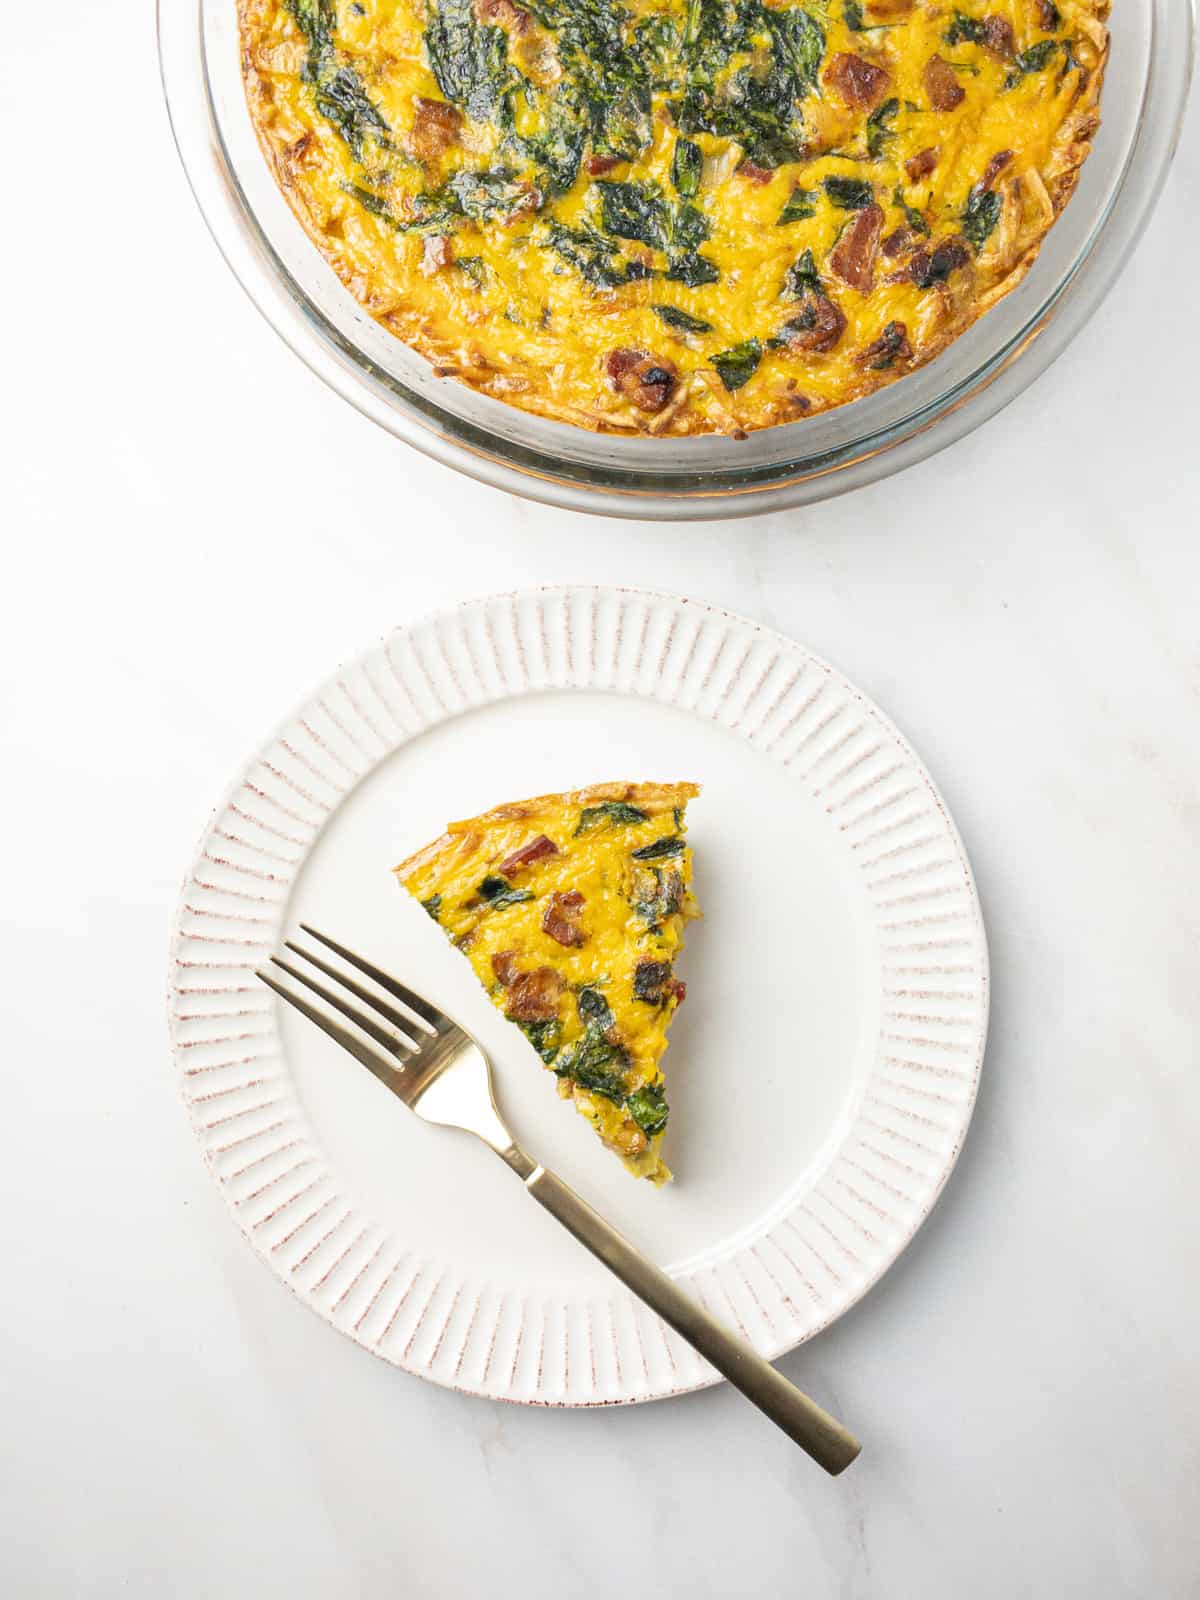 A slice of dairy-free gluten-free quiche on a white plate with a gold fork with the pie dish behind it.